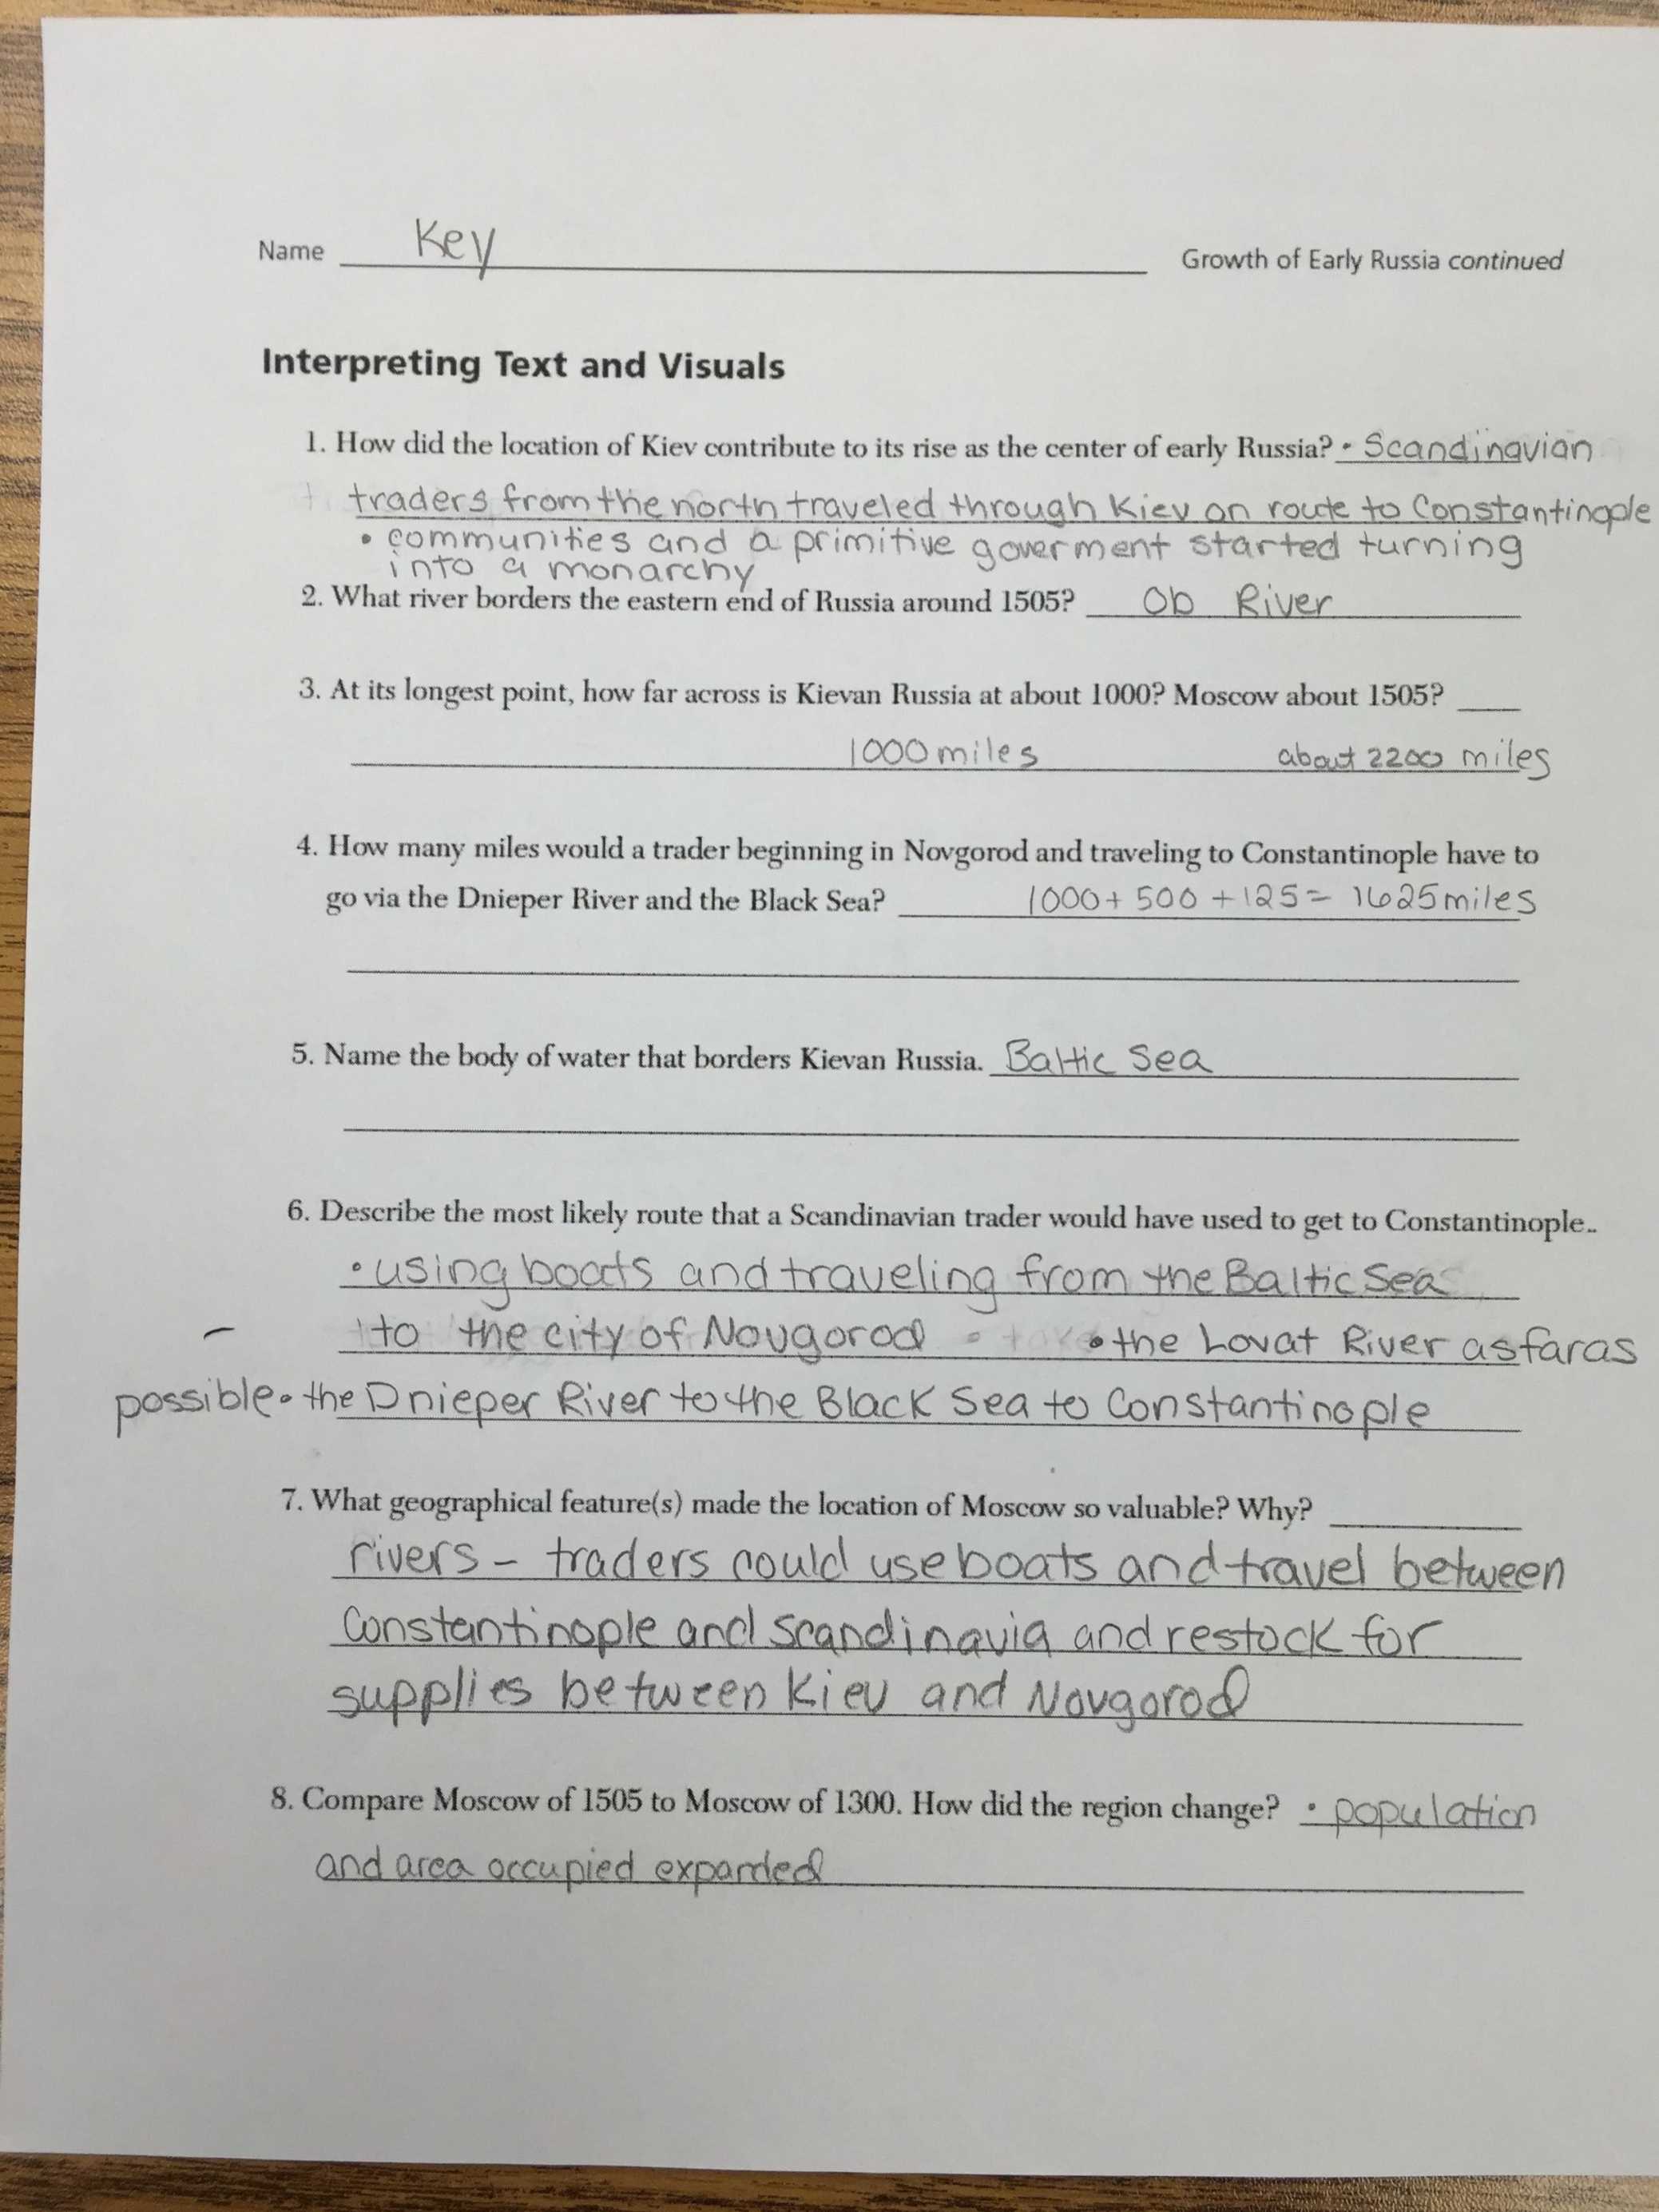 Skills Worksheet Concept Review Answers together with Worksheet Interpreting Text and Visuals Worksheet Answers Review